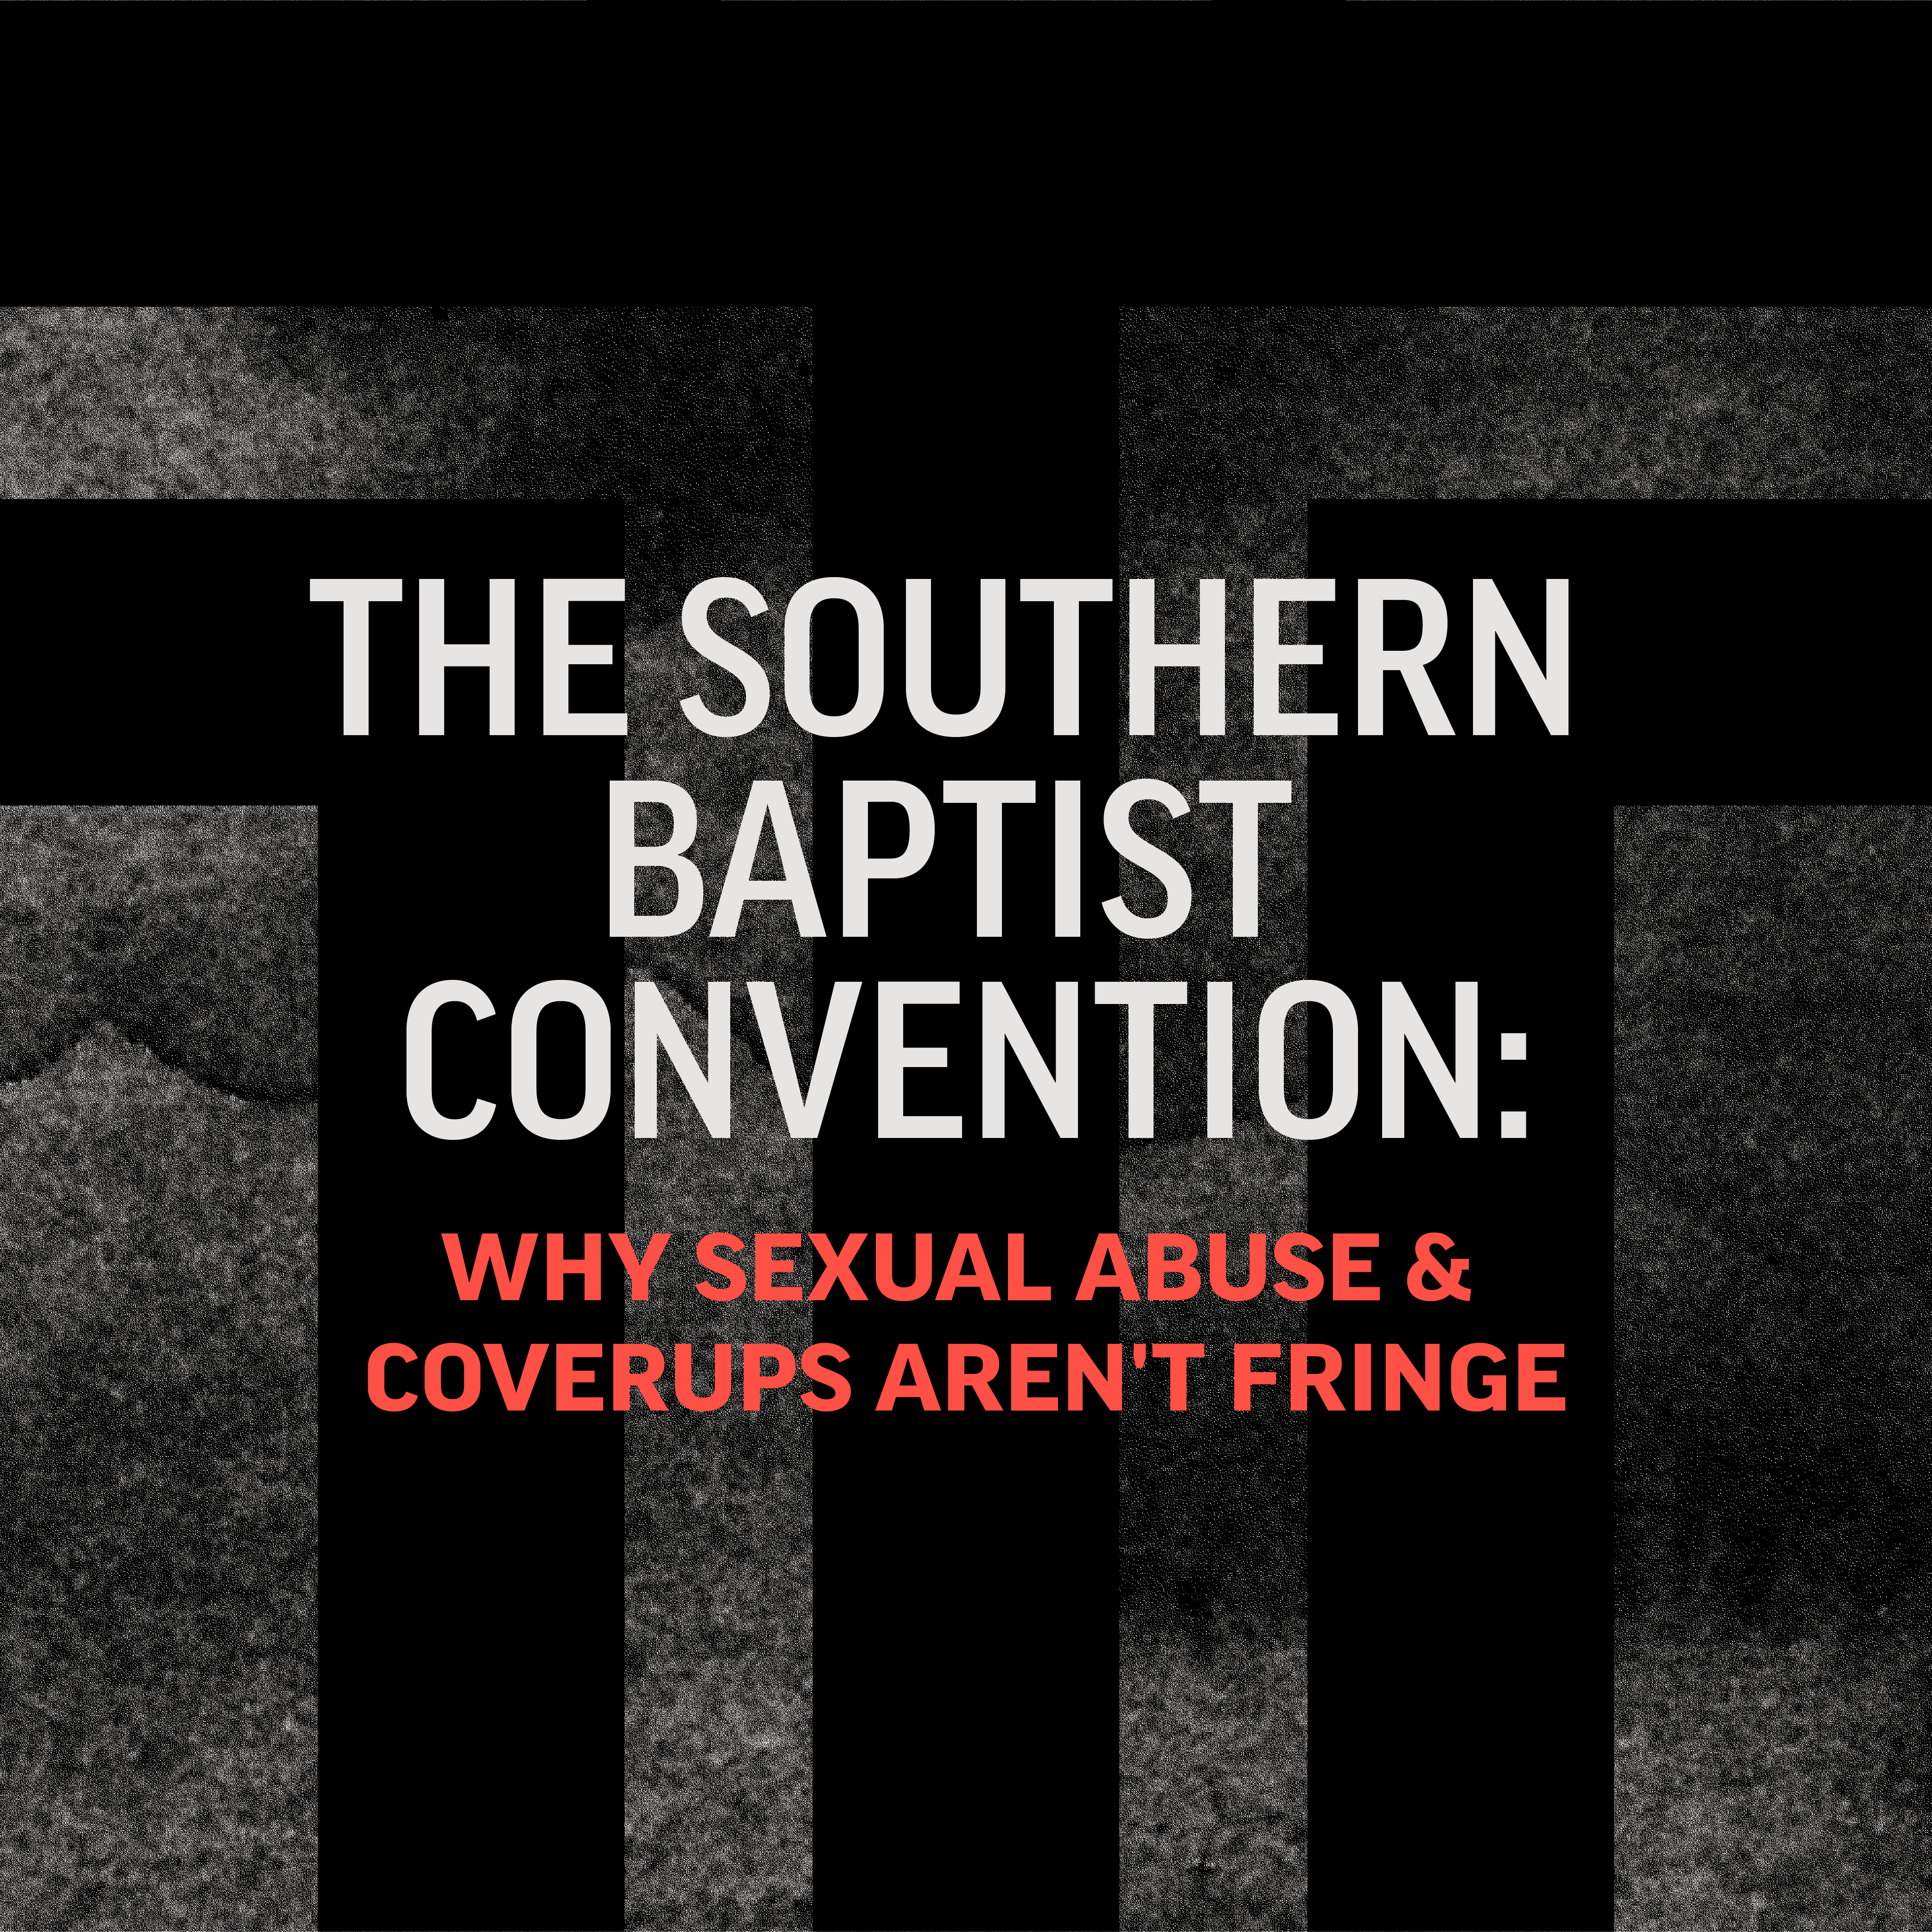 The Southern Baptist Convention: Why Sexual Abuse & Coverups Aren’t Fringe